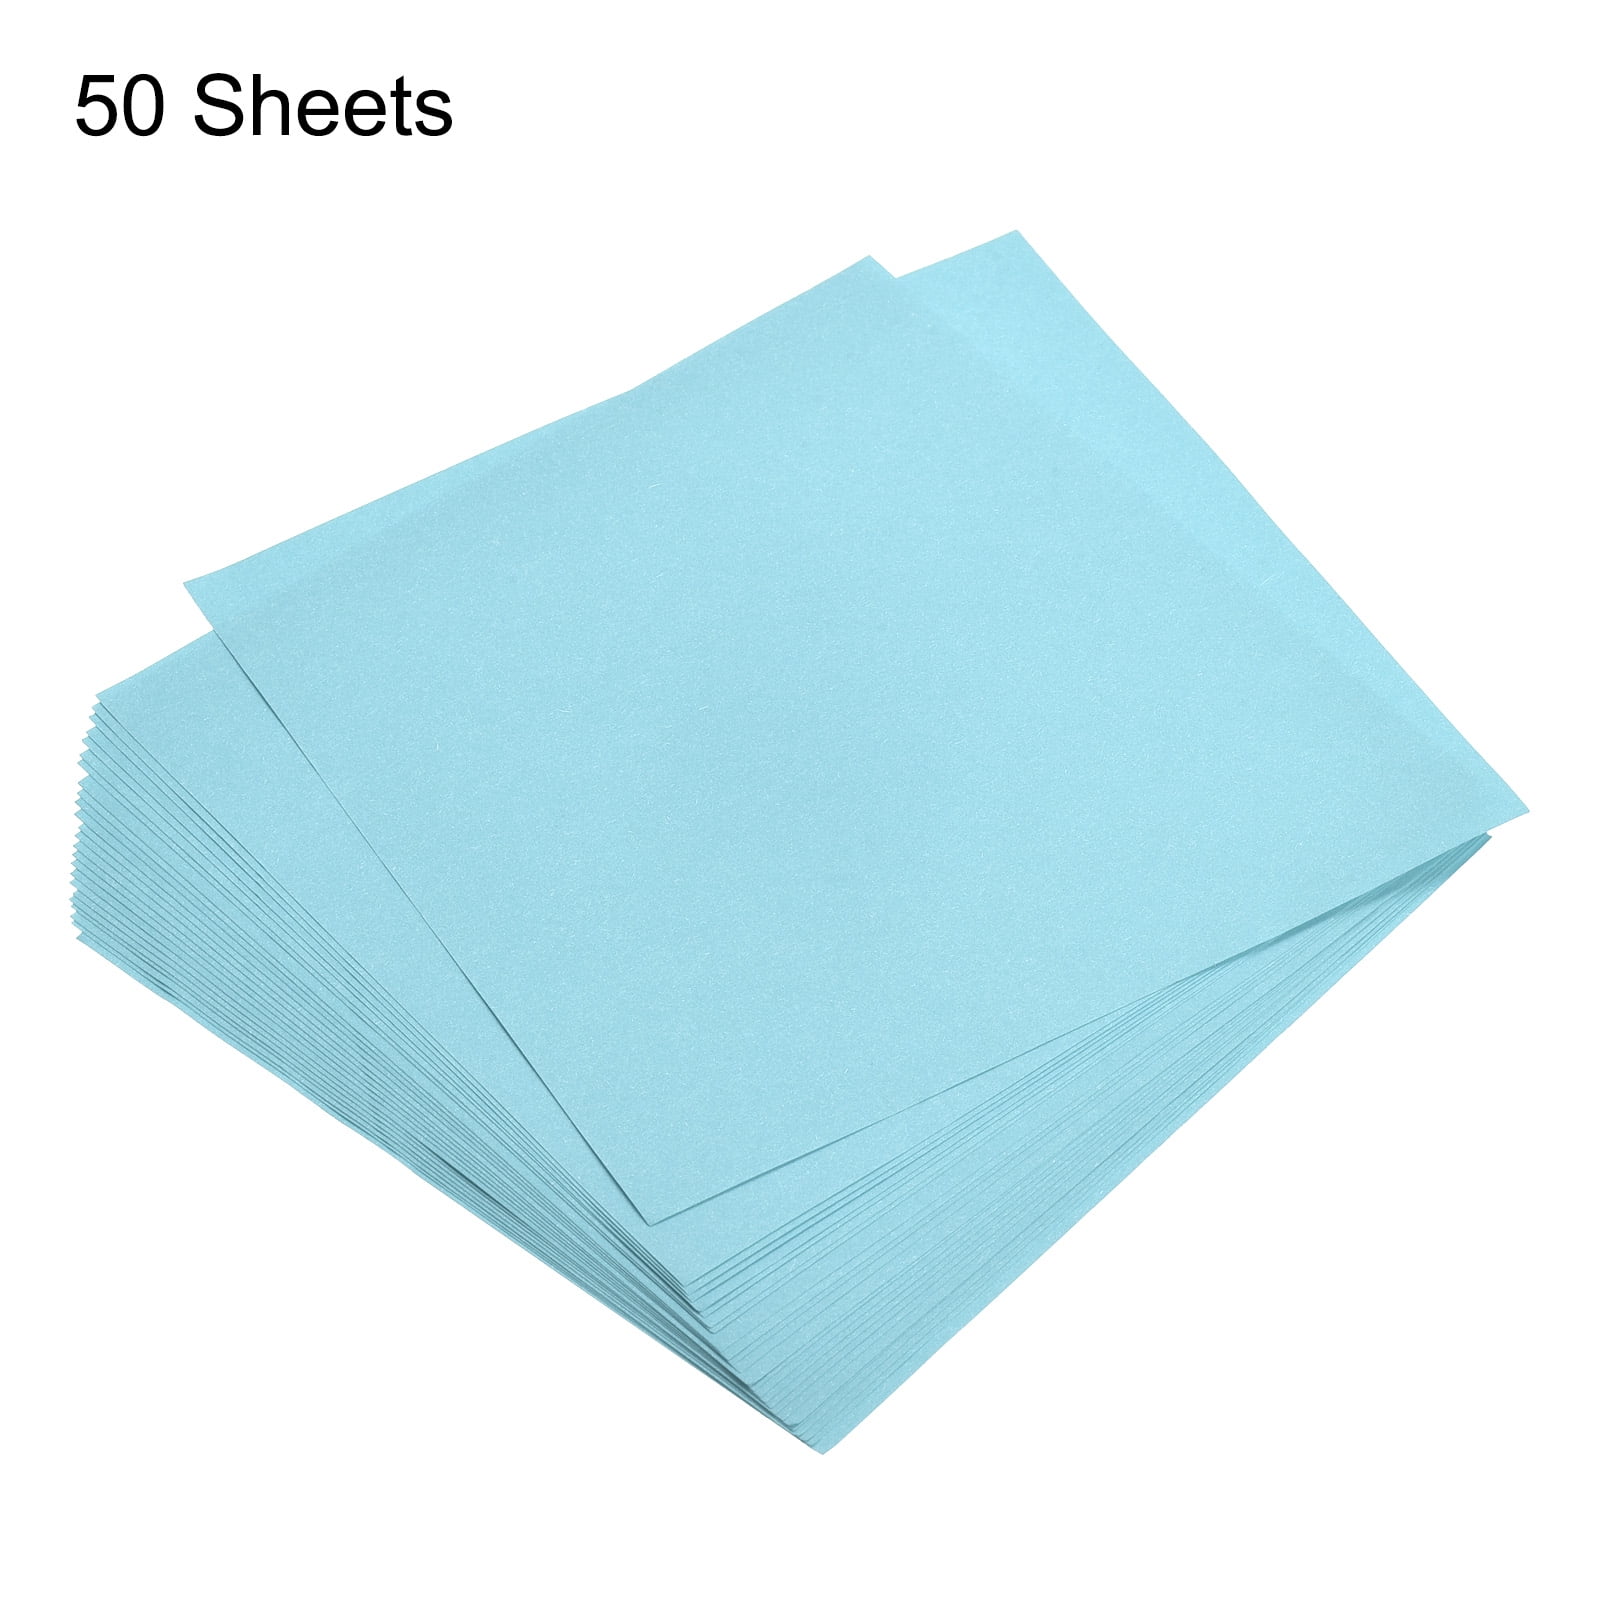 Uxcell Origami Paper Double Sided Light Blue 6x6 inch Square Sheet for Art Craft Project, Beginner 50 Sheets